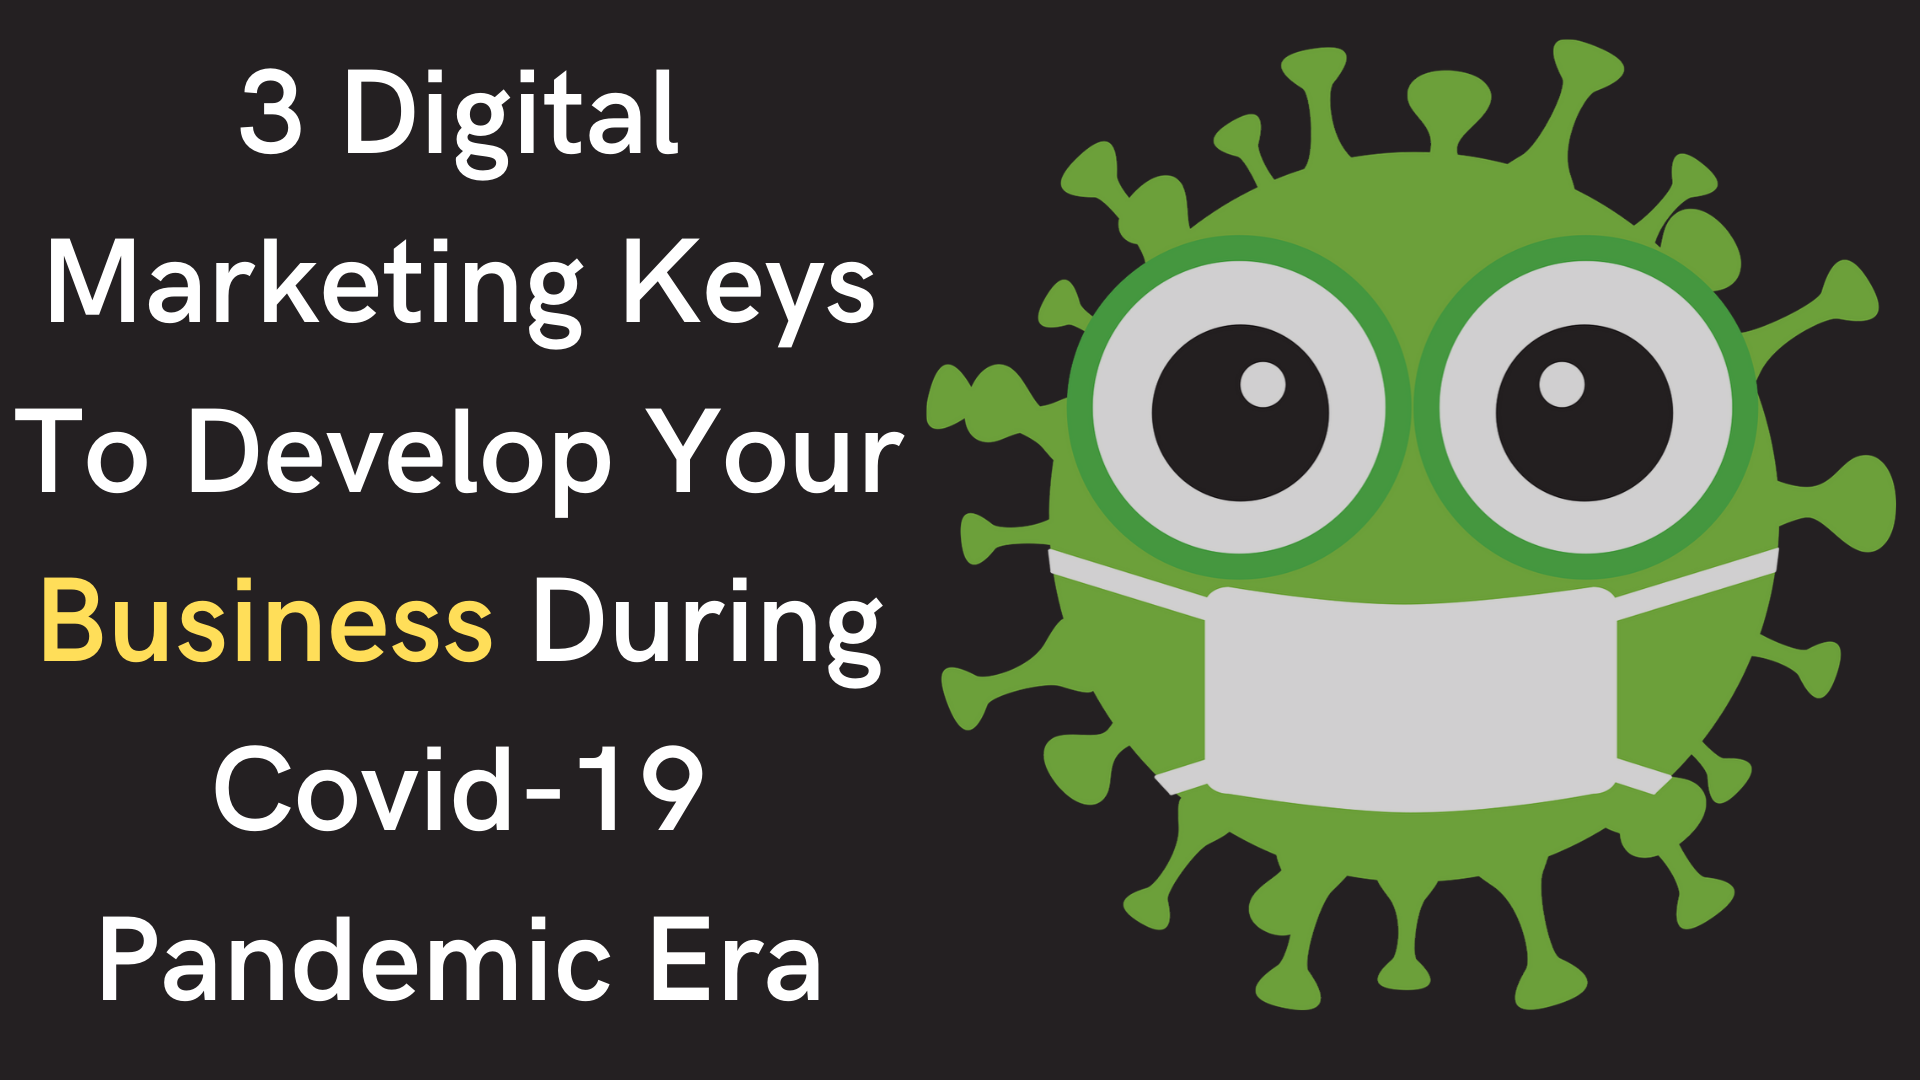 3-digital-marketing-keys-to-develop-your-business-during-covid-19-pandemic-era